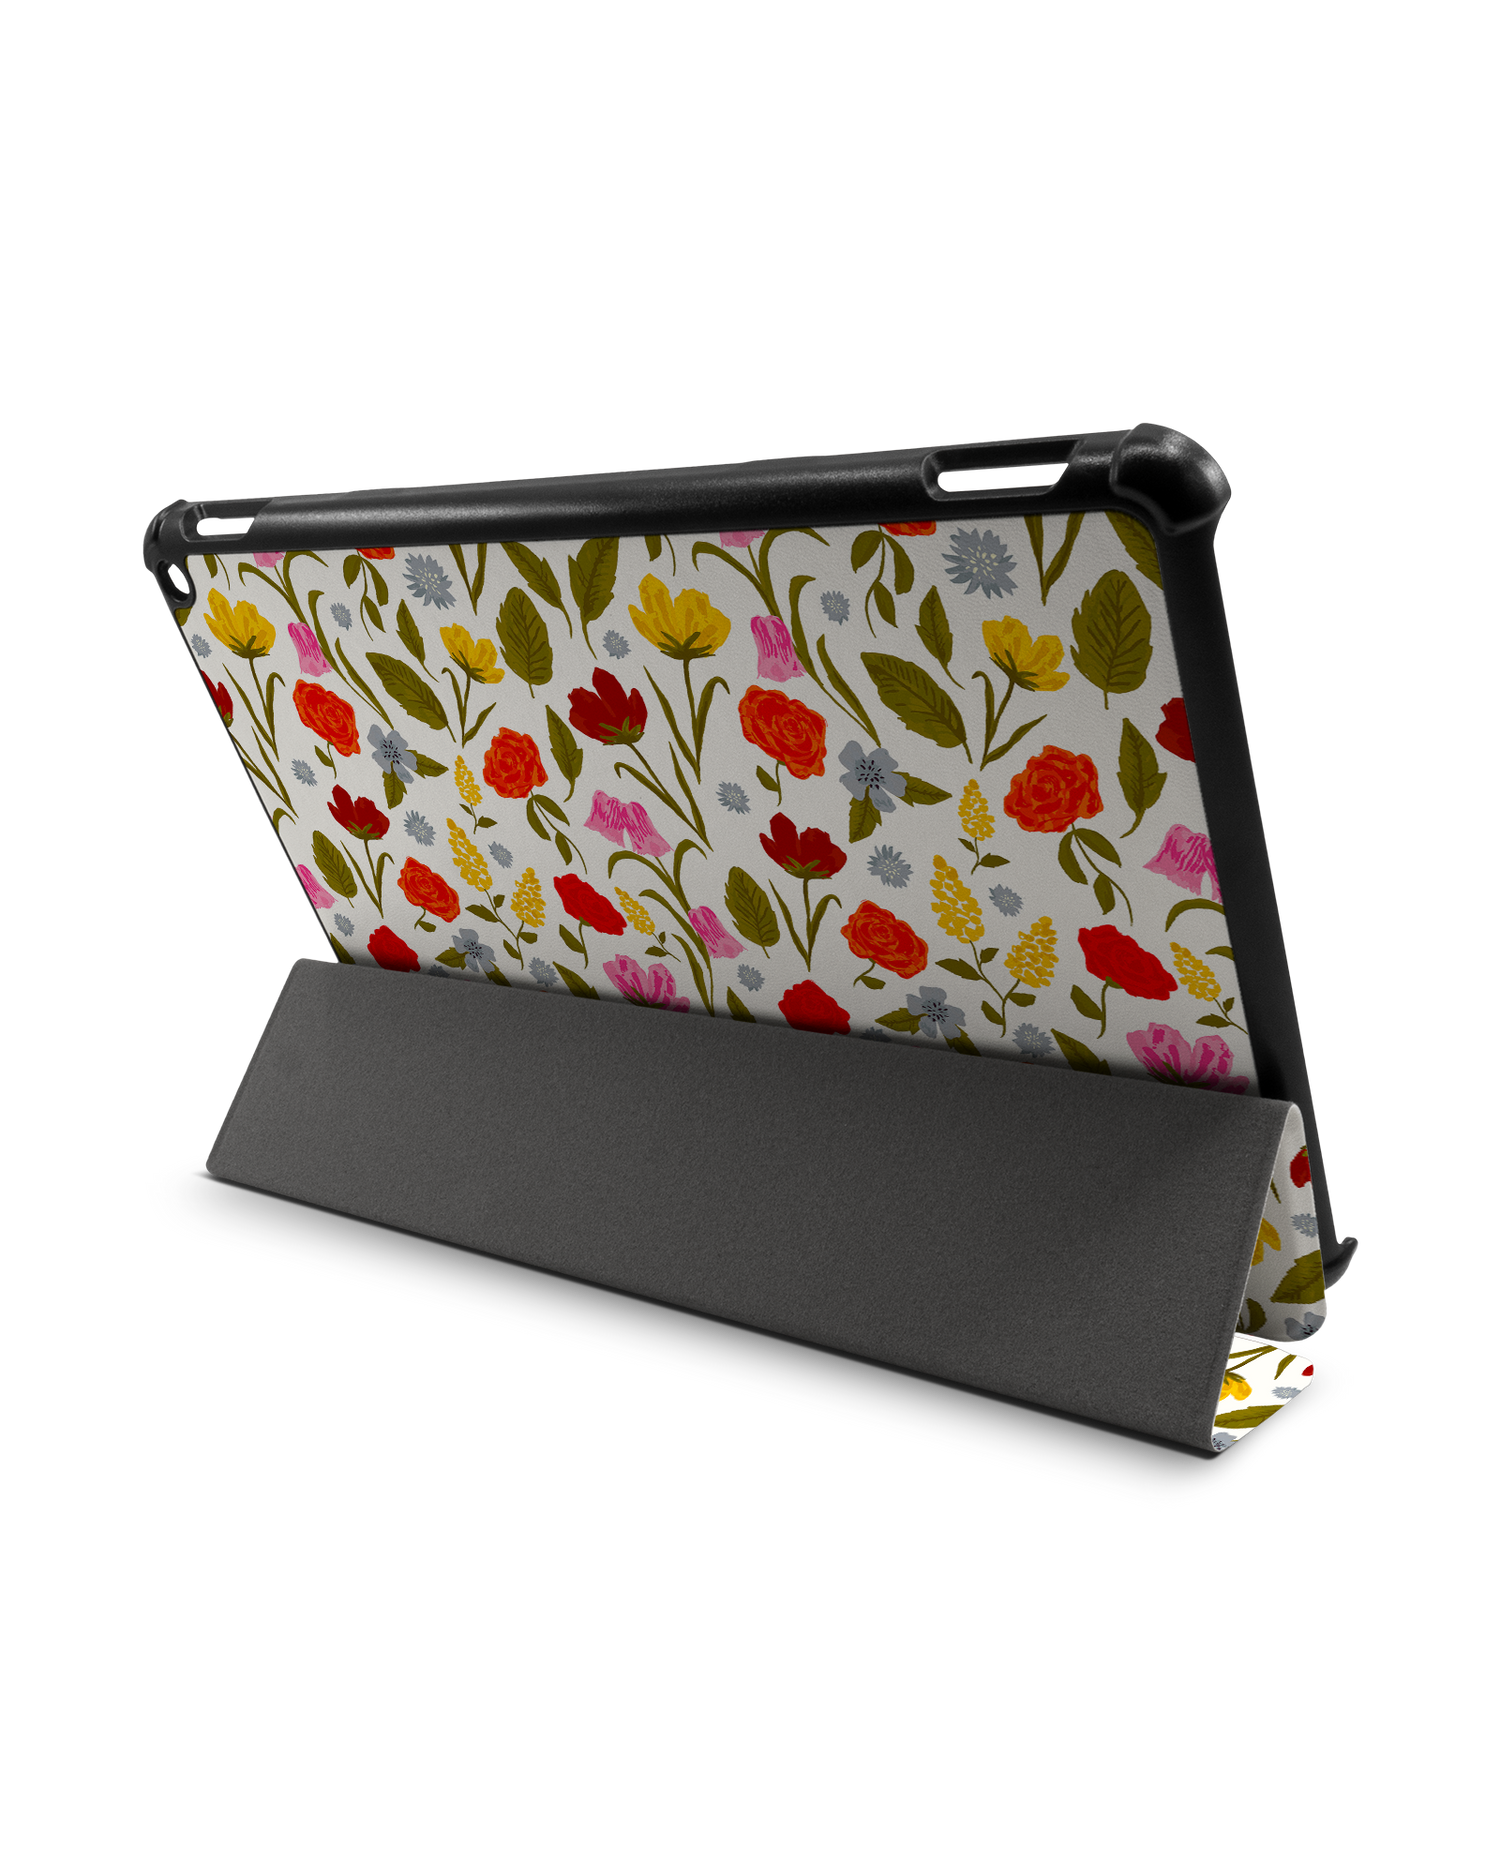 Botanical Beauties Tablet Smart Case for Amazon Fire HD 10 (2021): Used as Stand